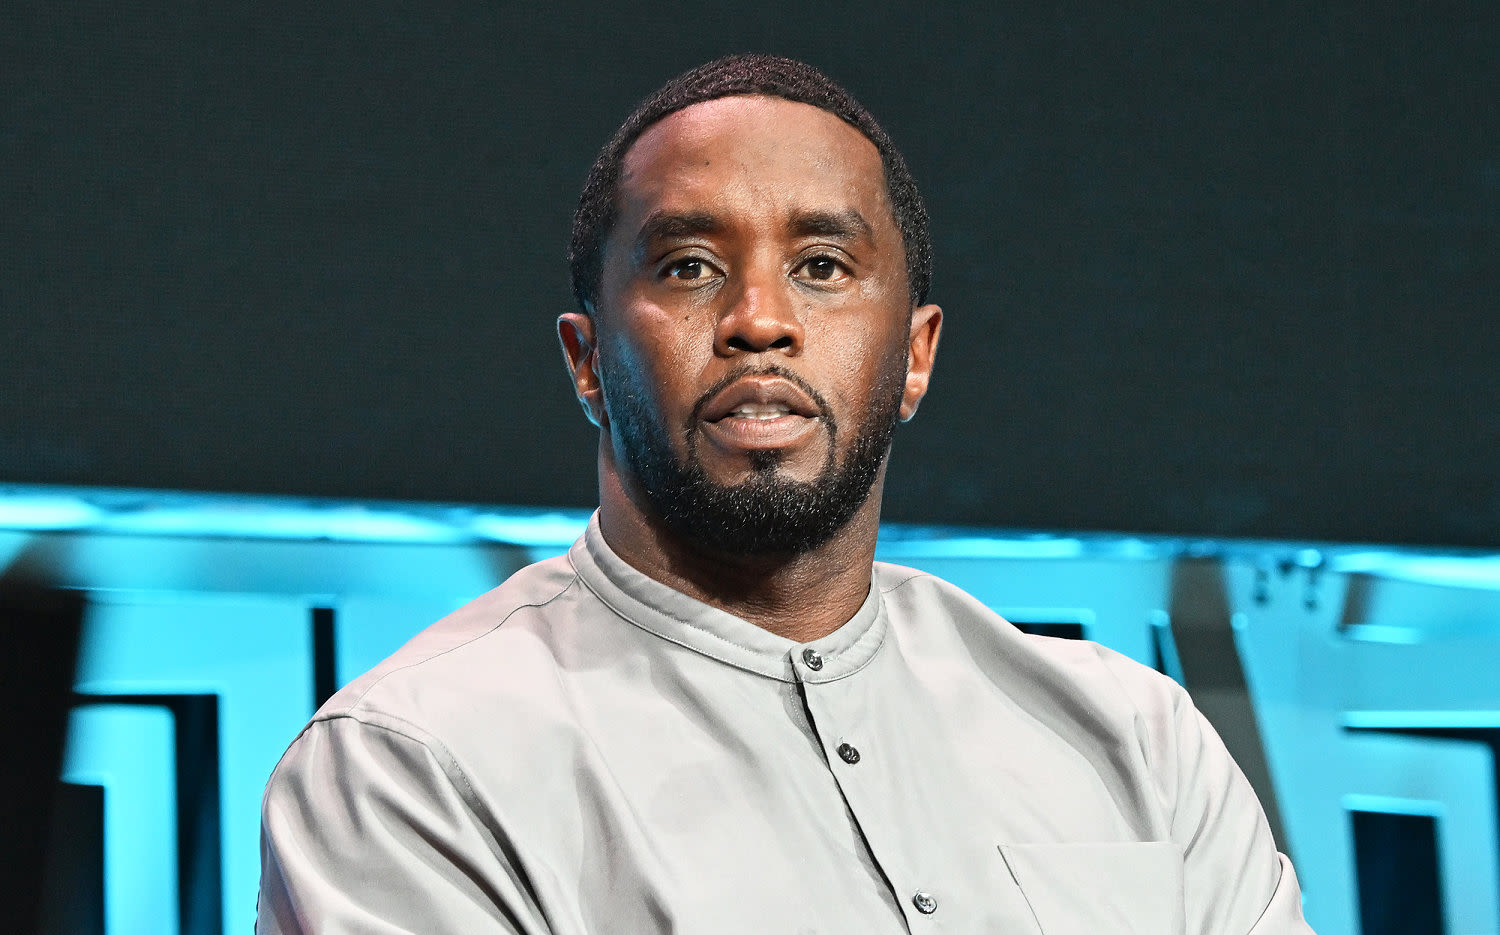 Sean ‘Diddy’ Combs facing new lawsuit by another woman who says he drugged, sexually assaulted her